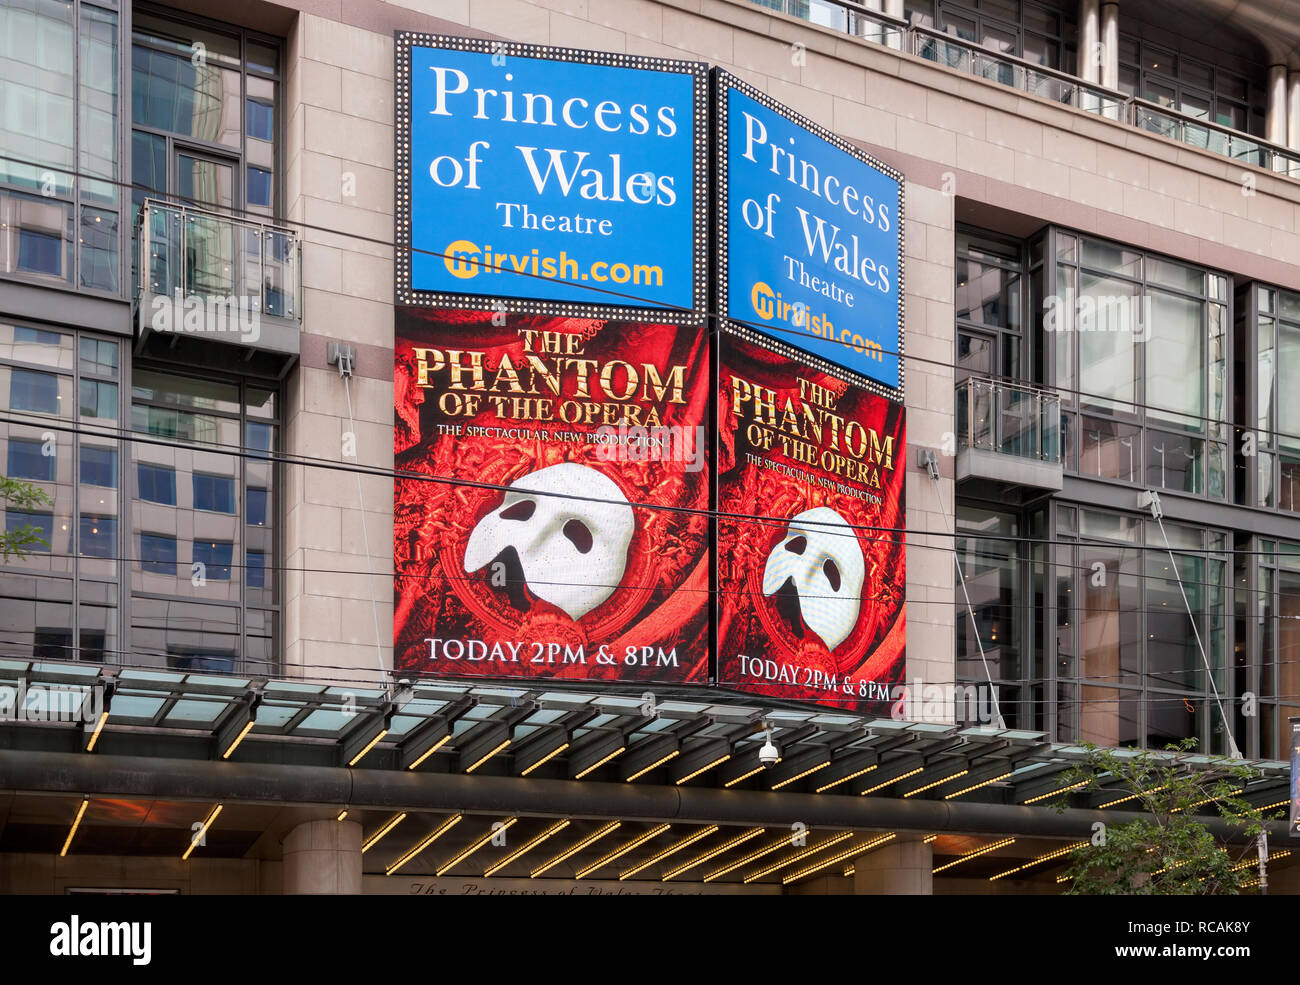 The Princess of Wales Theatre sign. City of Toronto, Ontario, Canada. Stock Photo